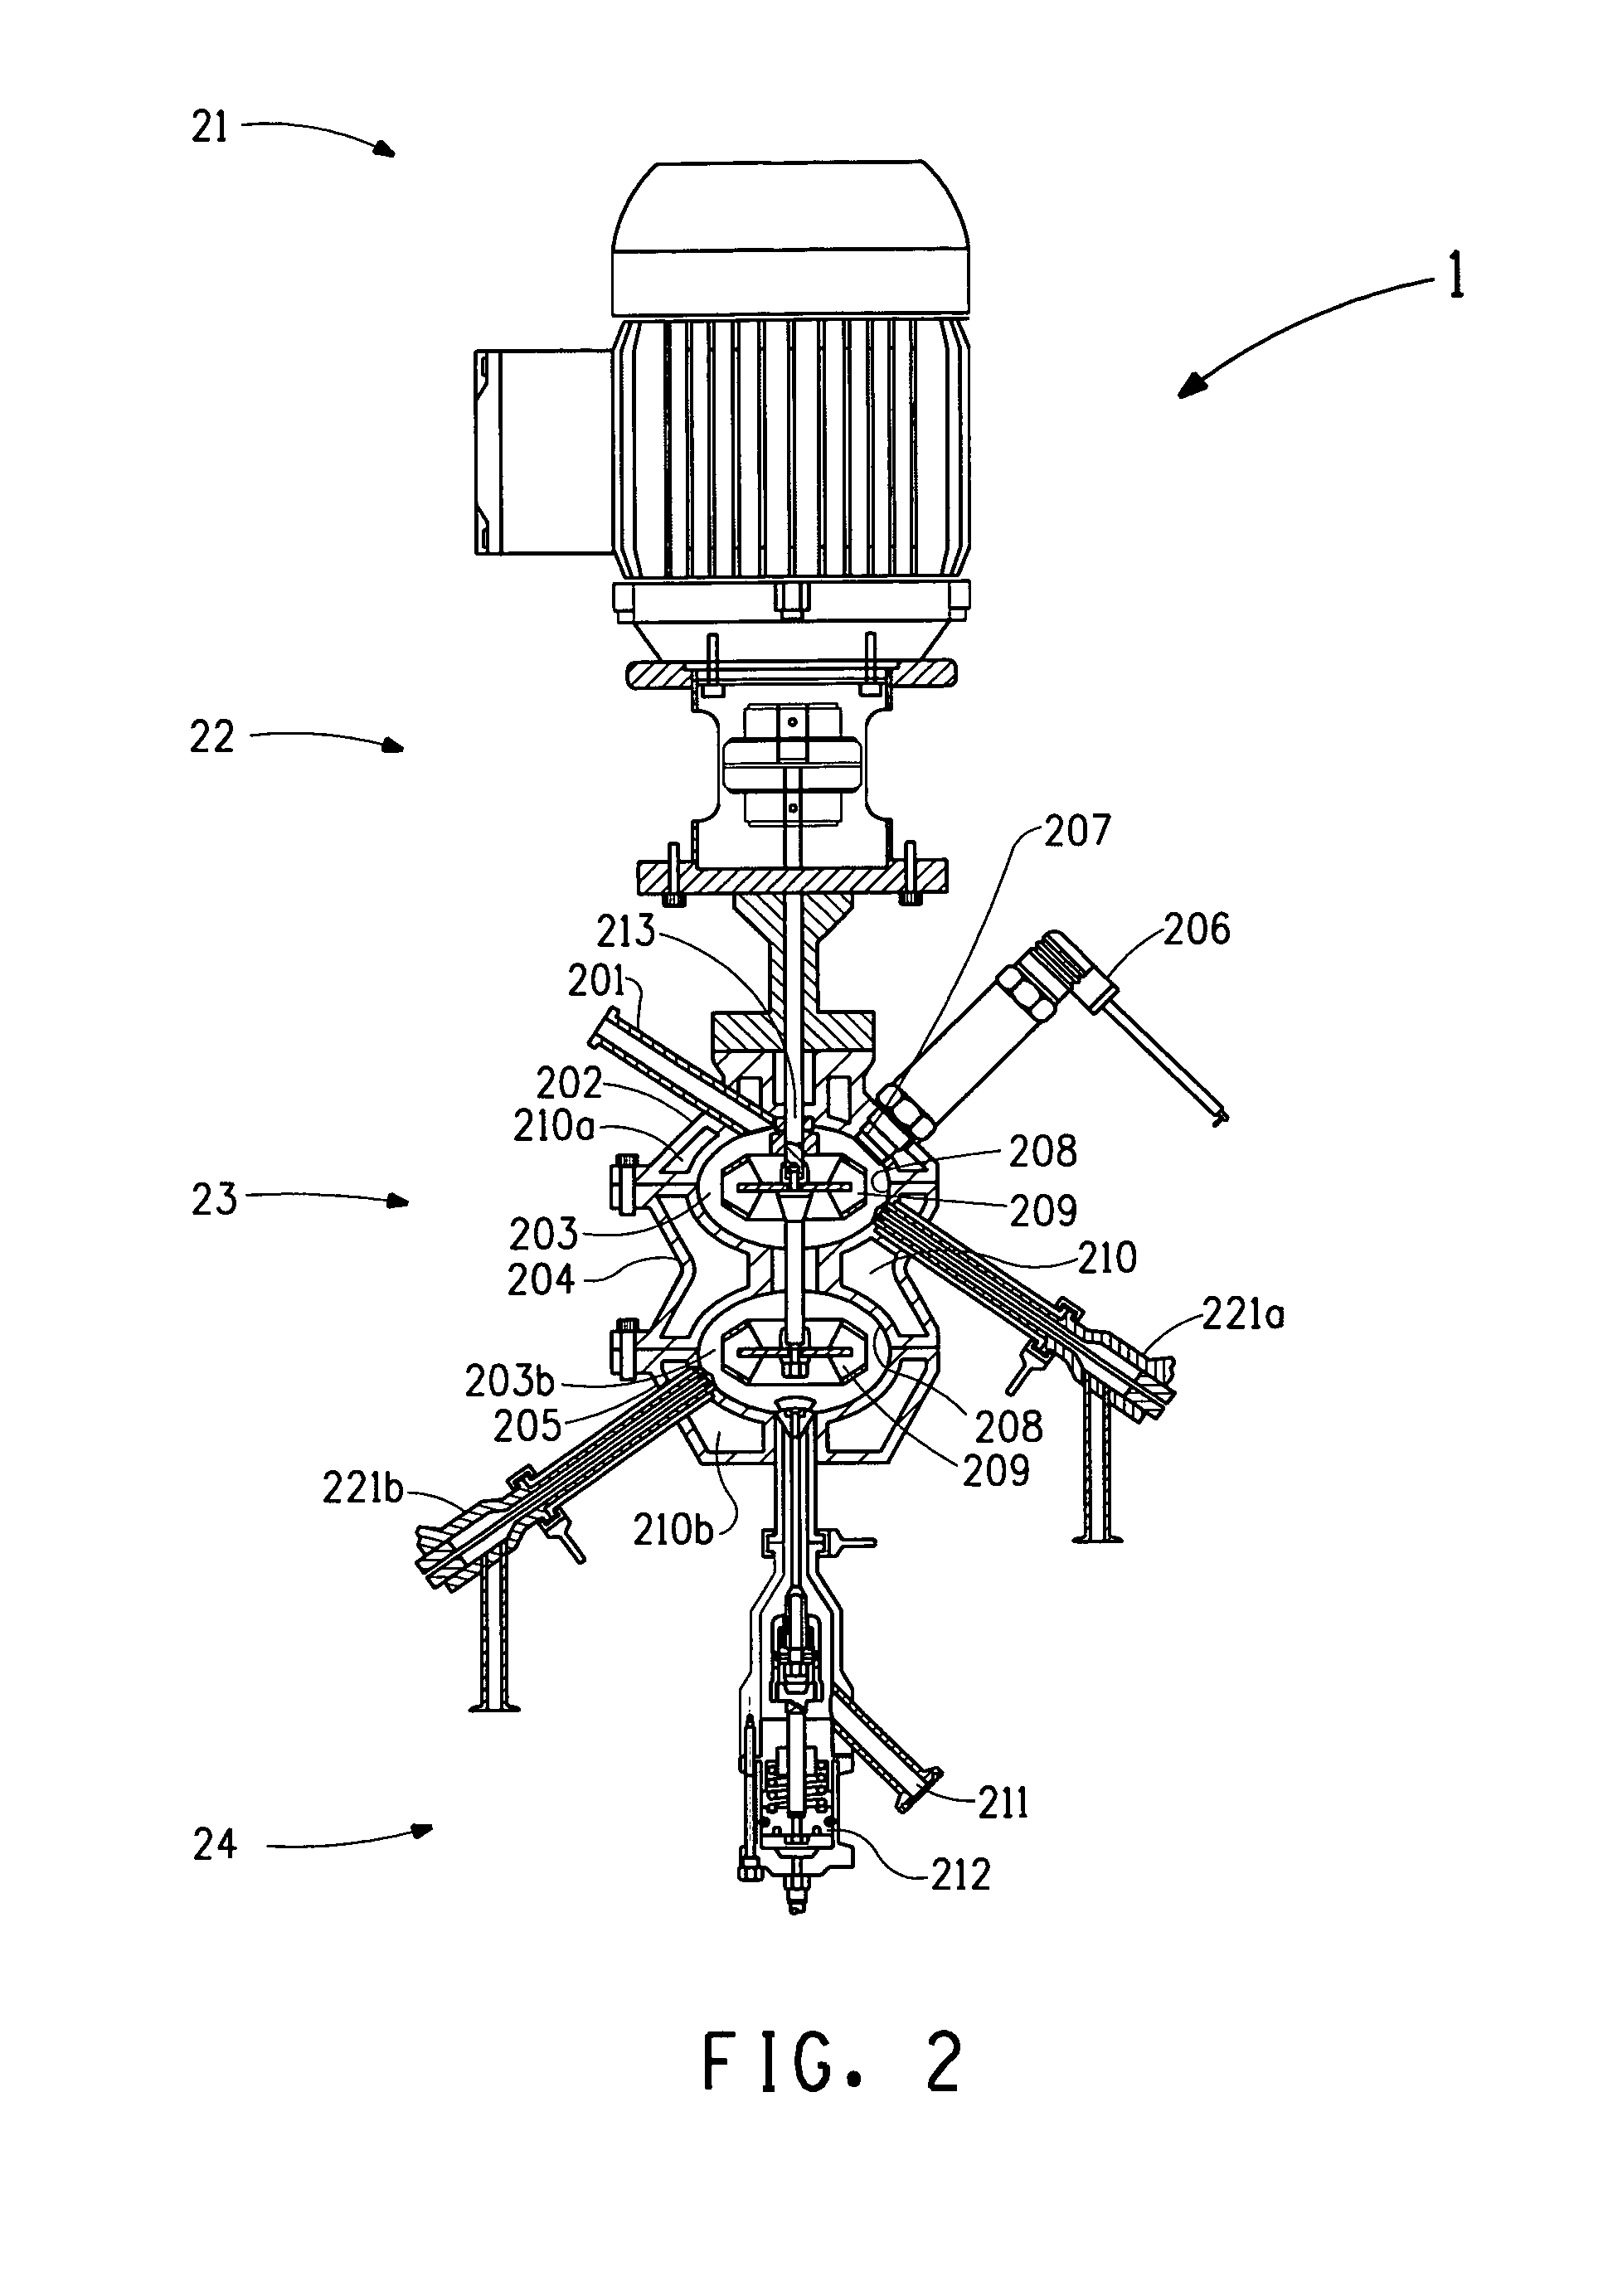 In-line multi-chamber mixer